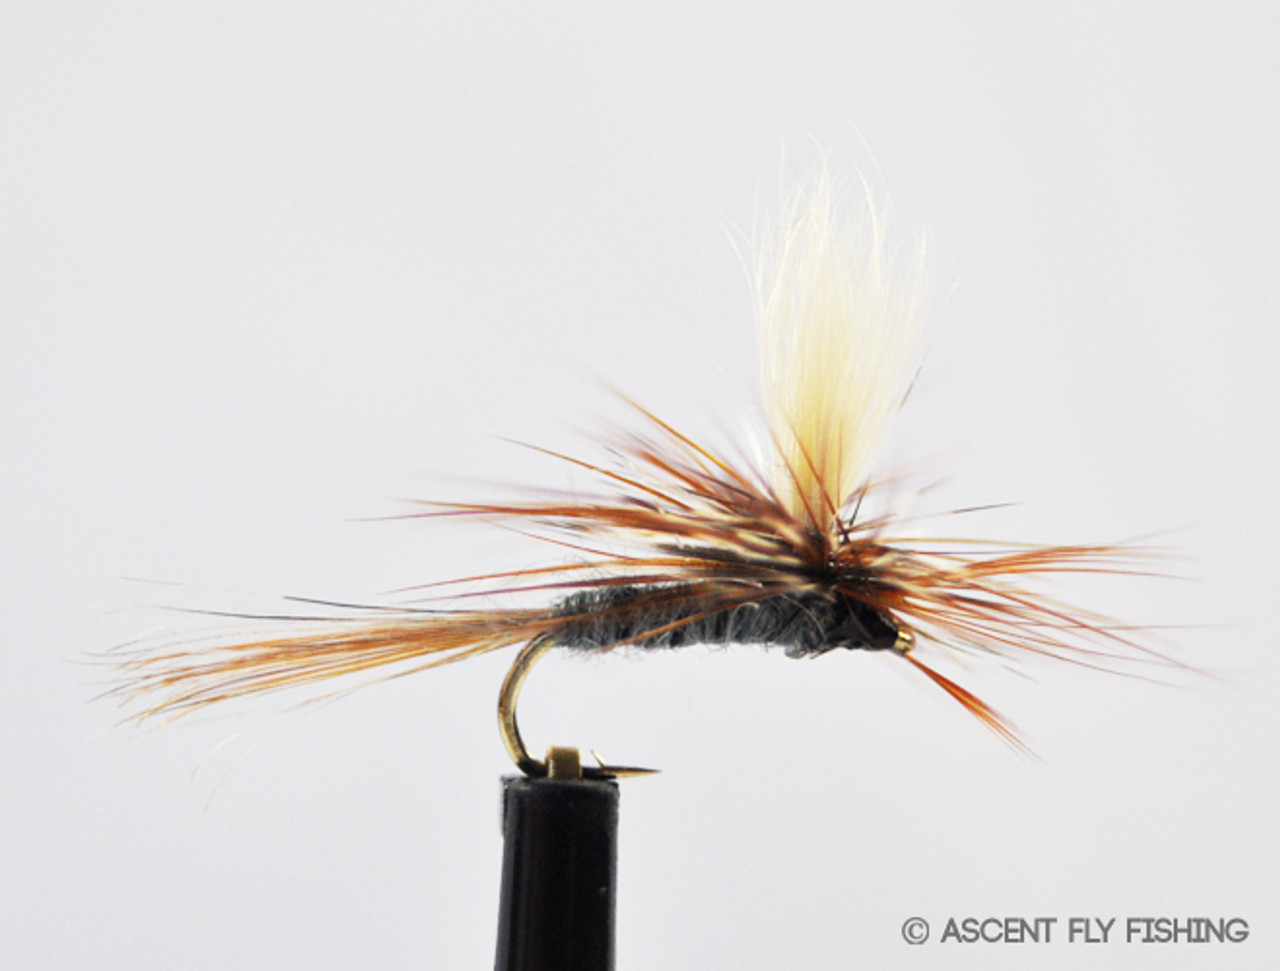 Parachute Adams - Ascent Fly Fishing